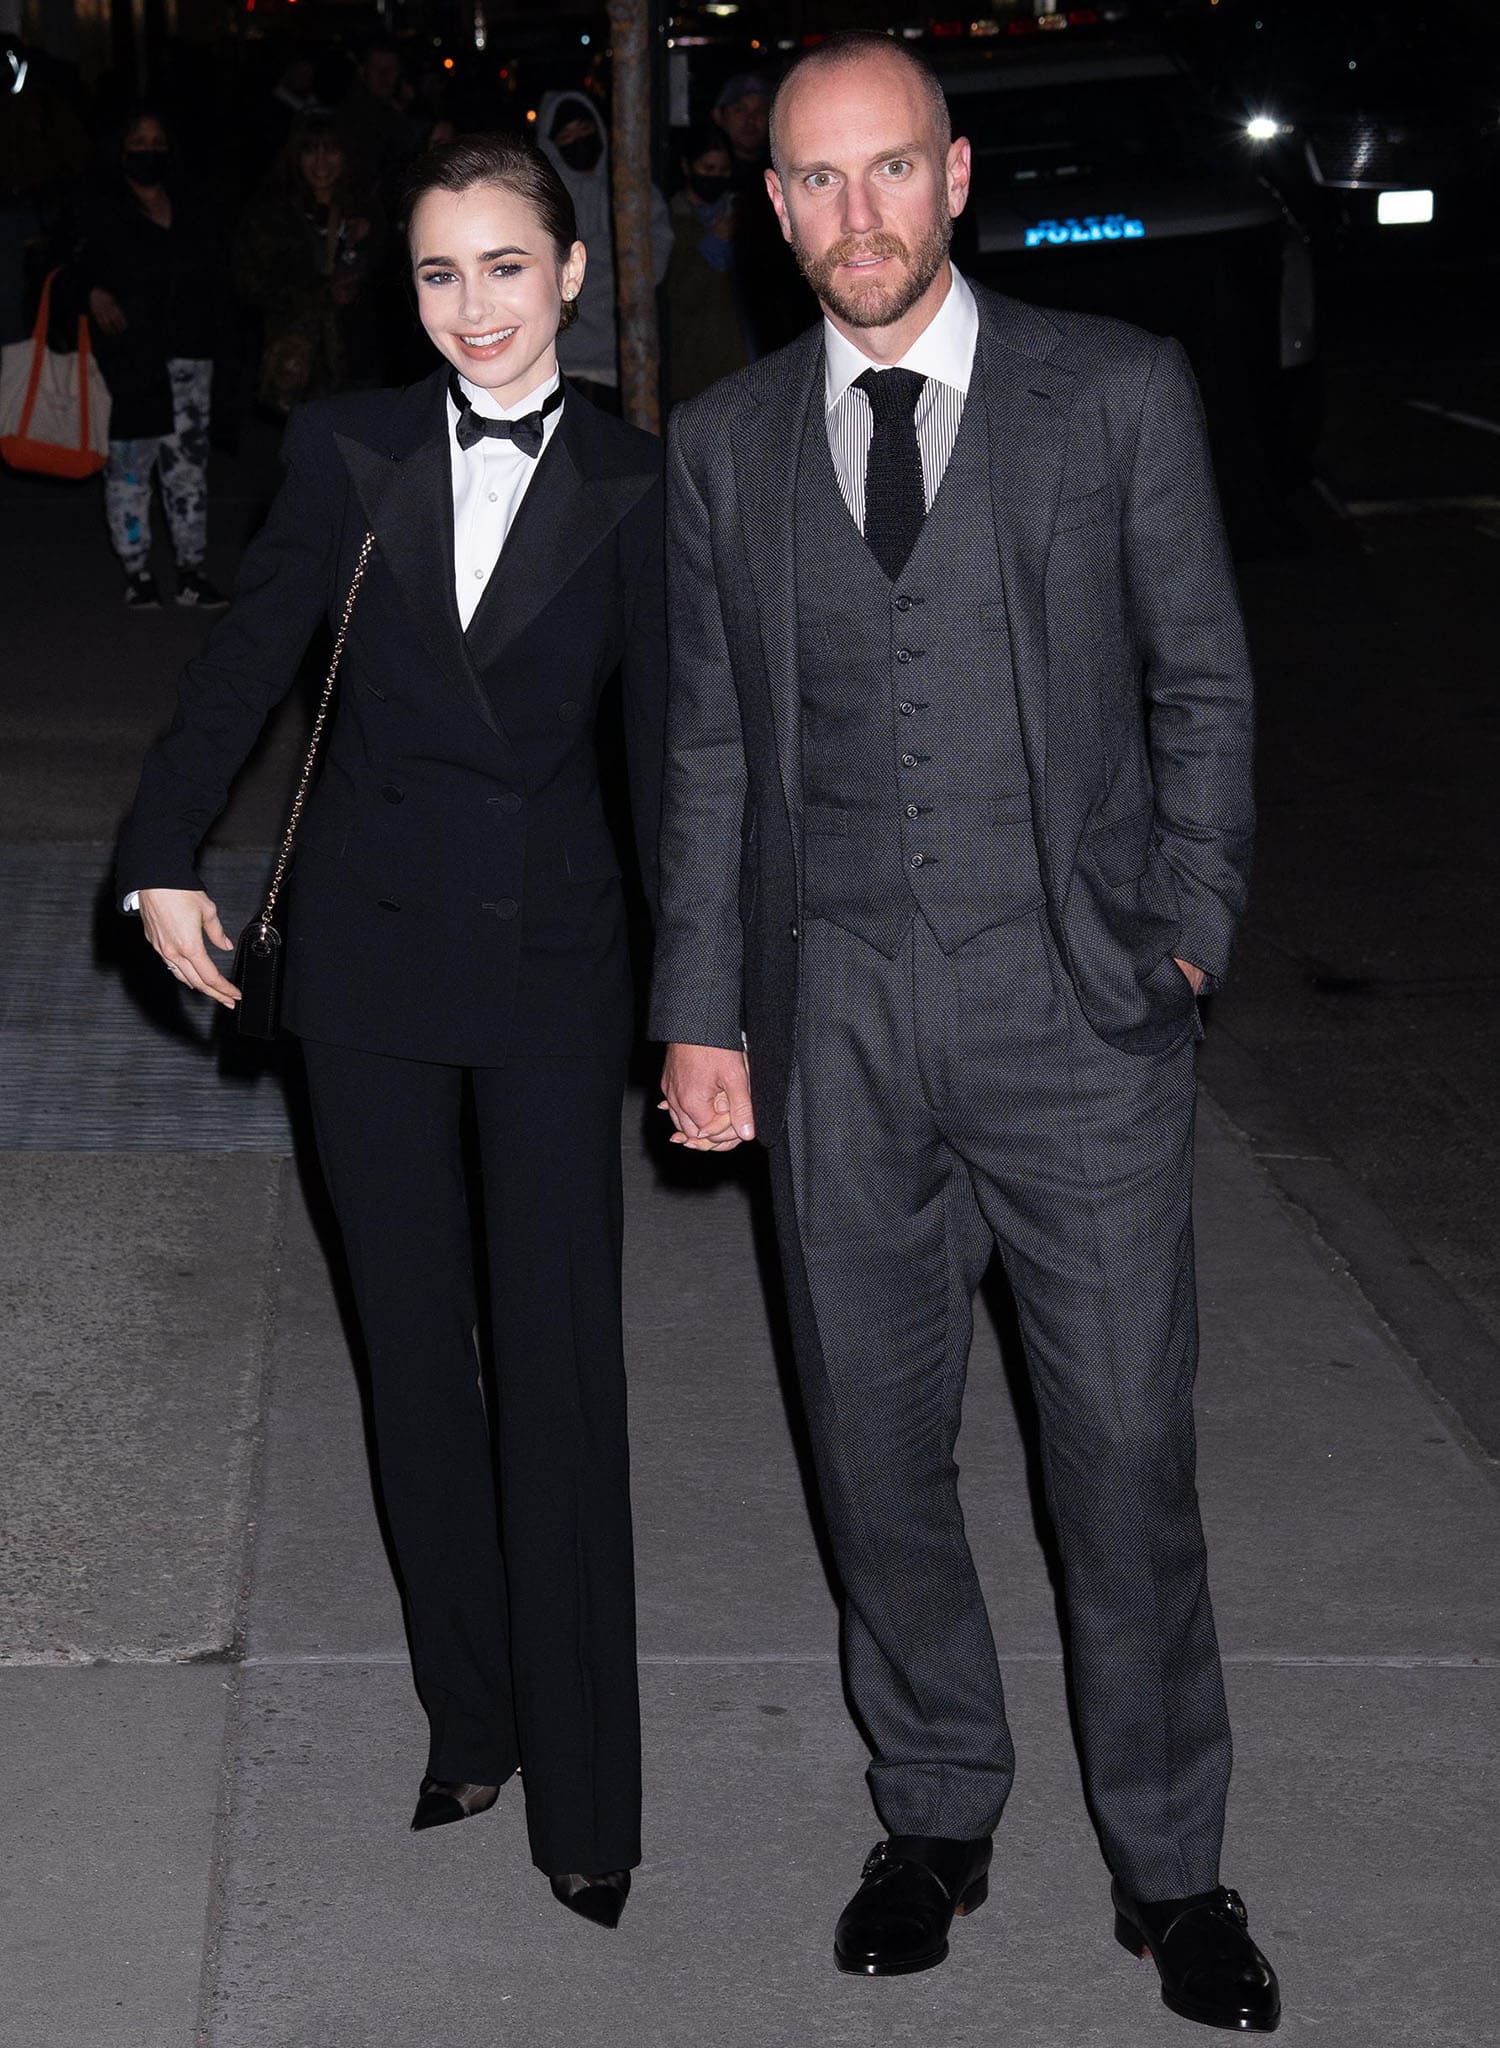 Lily Collins' husband Charlie McDowell looks dapper in a three-piece gray suit with a striped shirt and a black tie